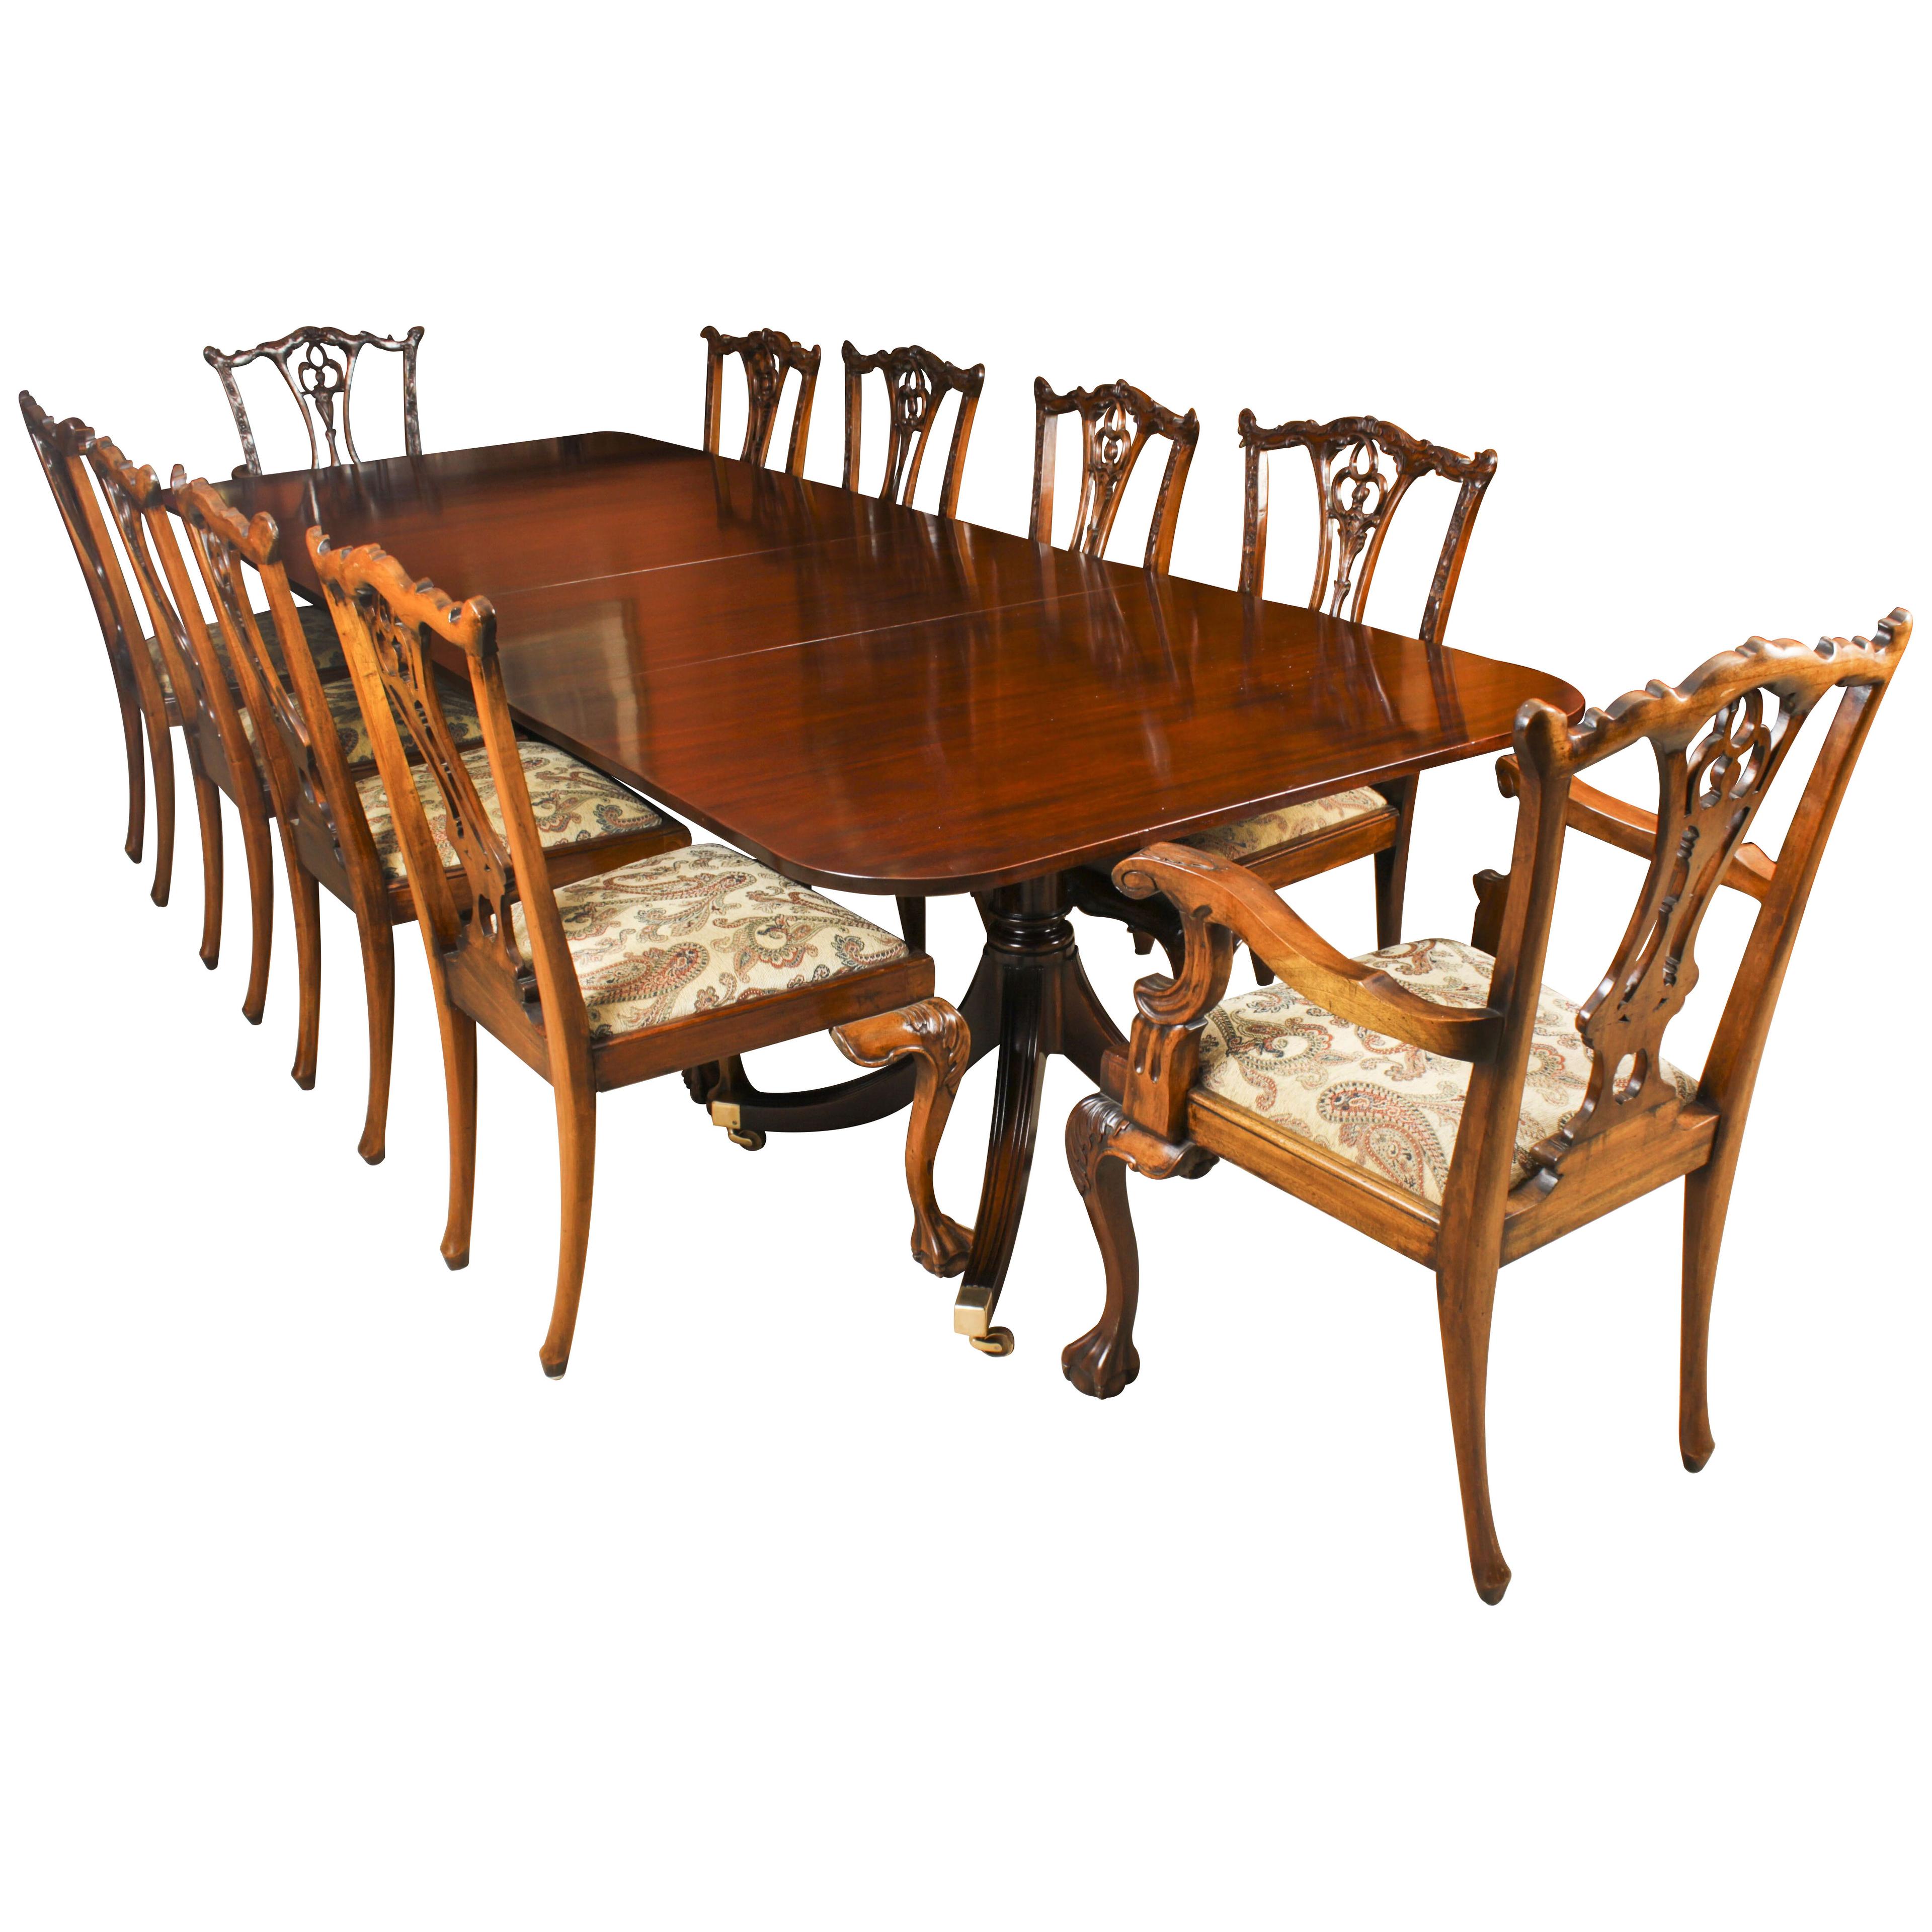 Vintage Dining Table & 10 Chippendale chairs William Tillman 20th C